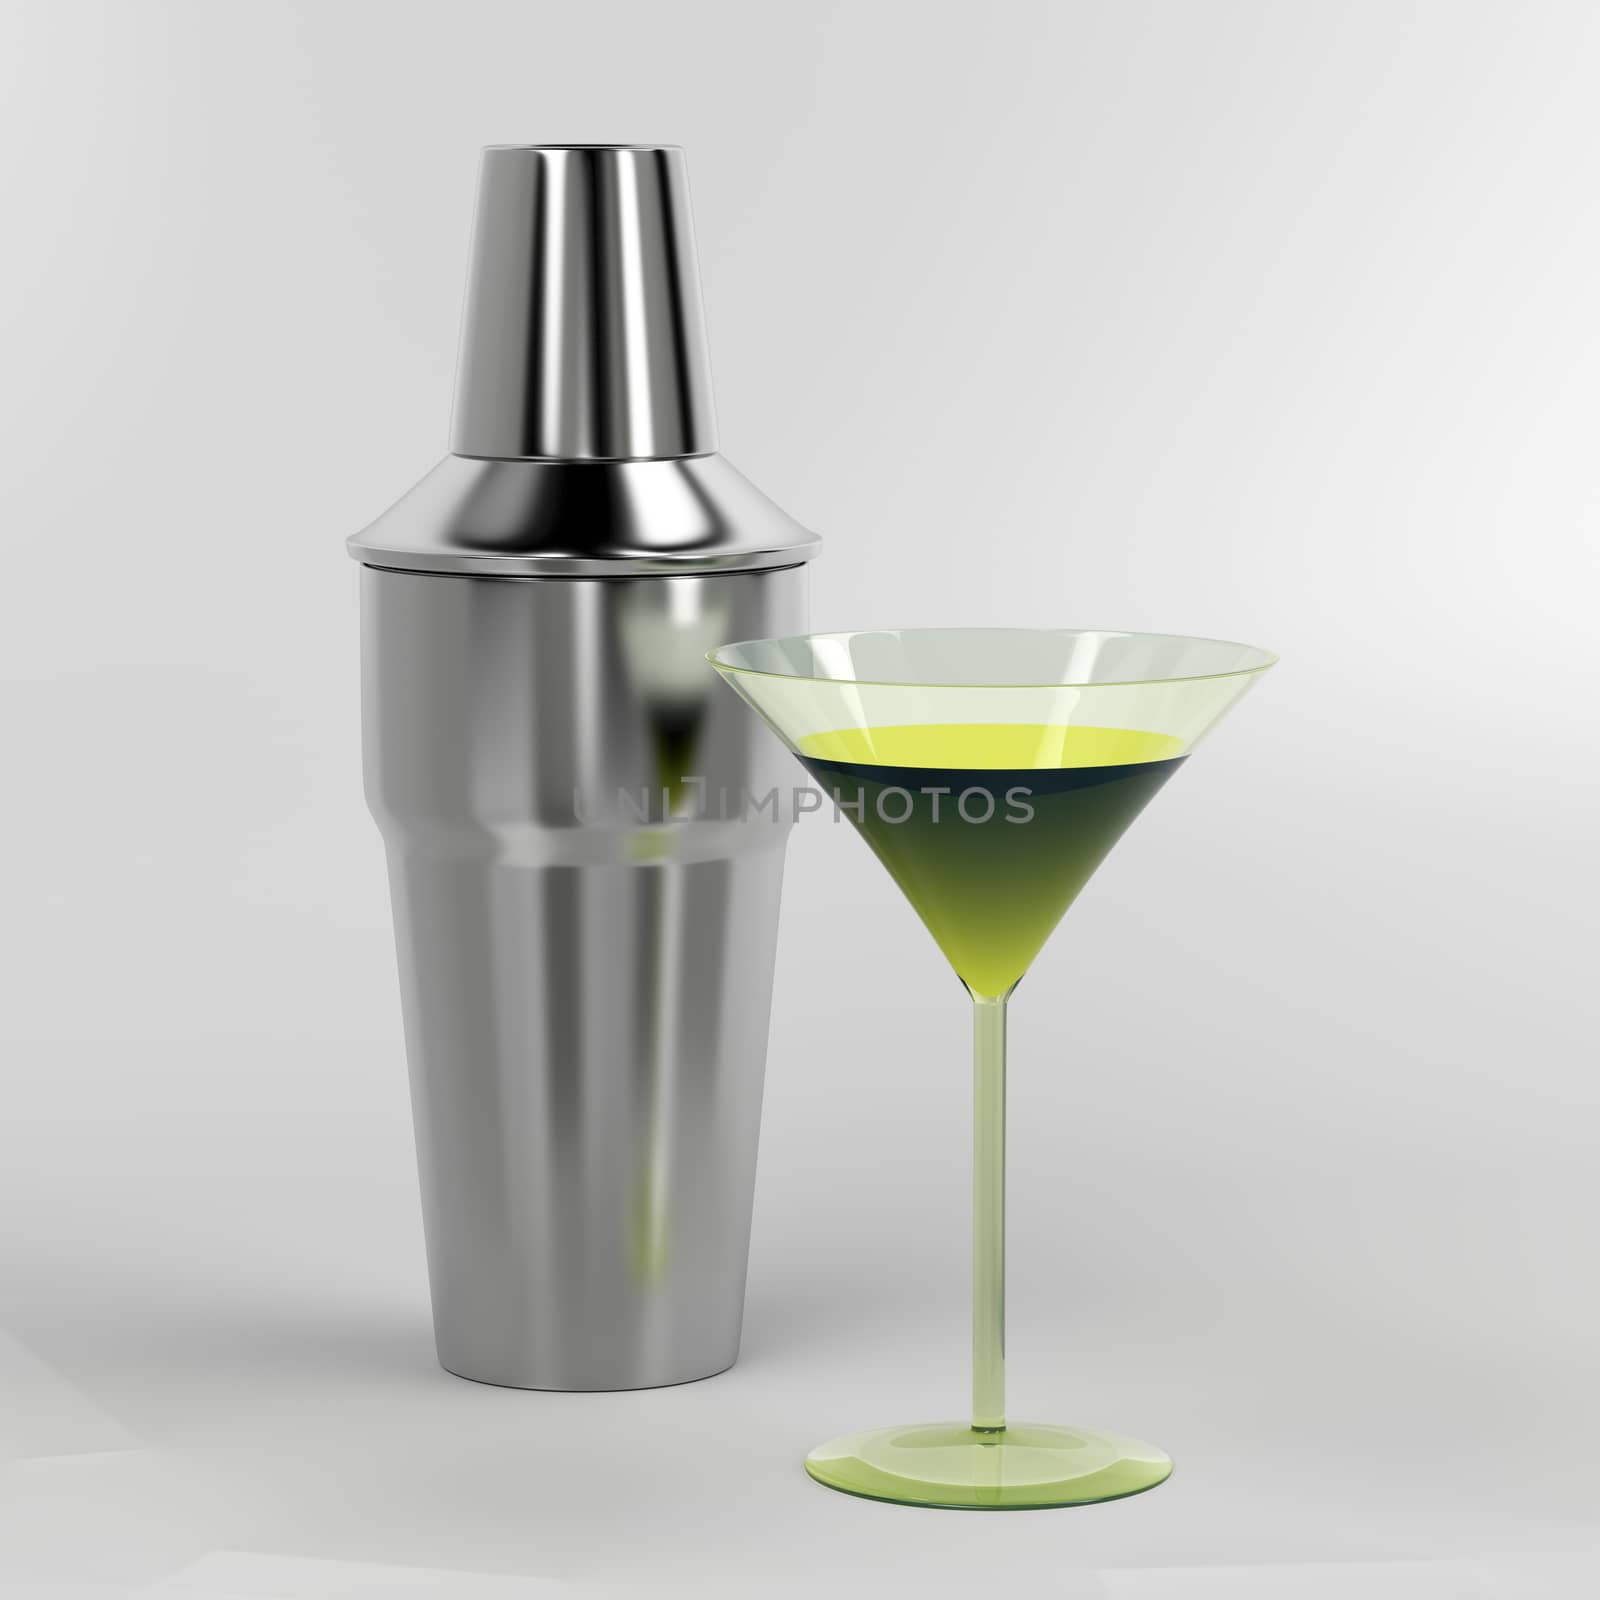 Shaker and cocktail glass by magraphics